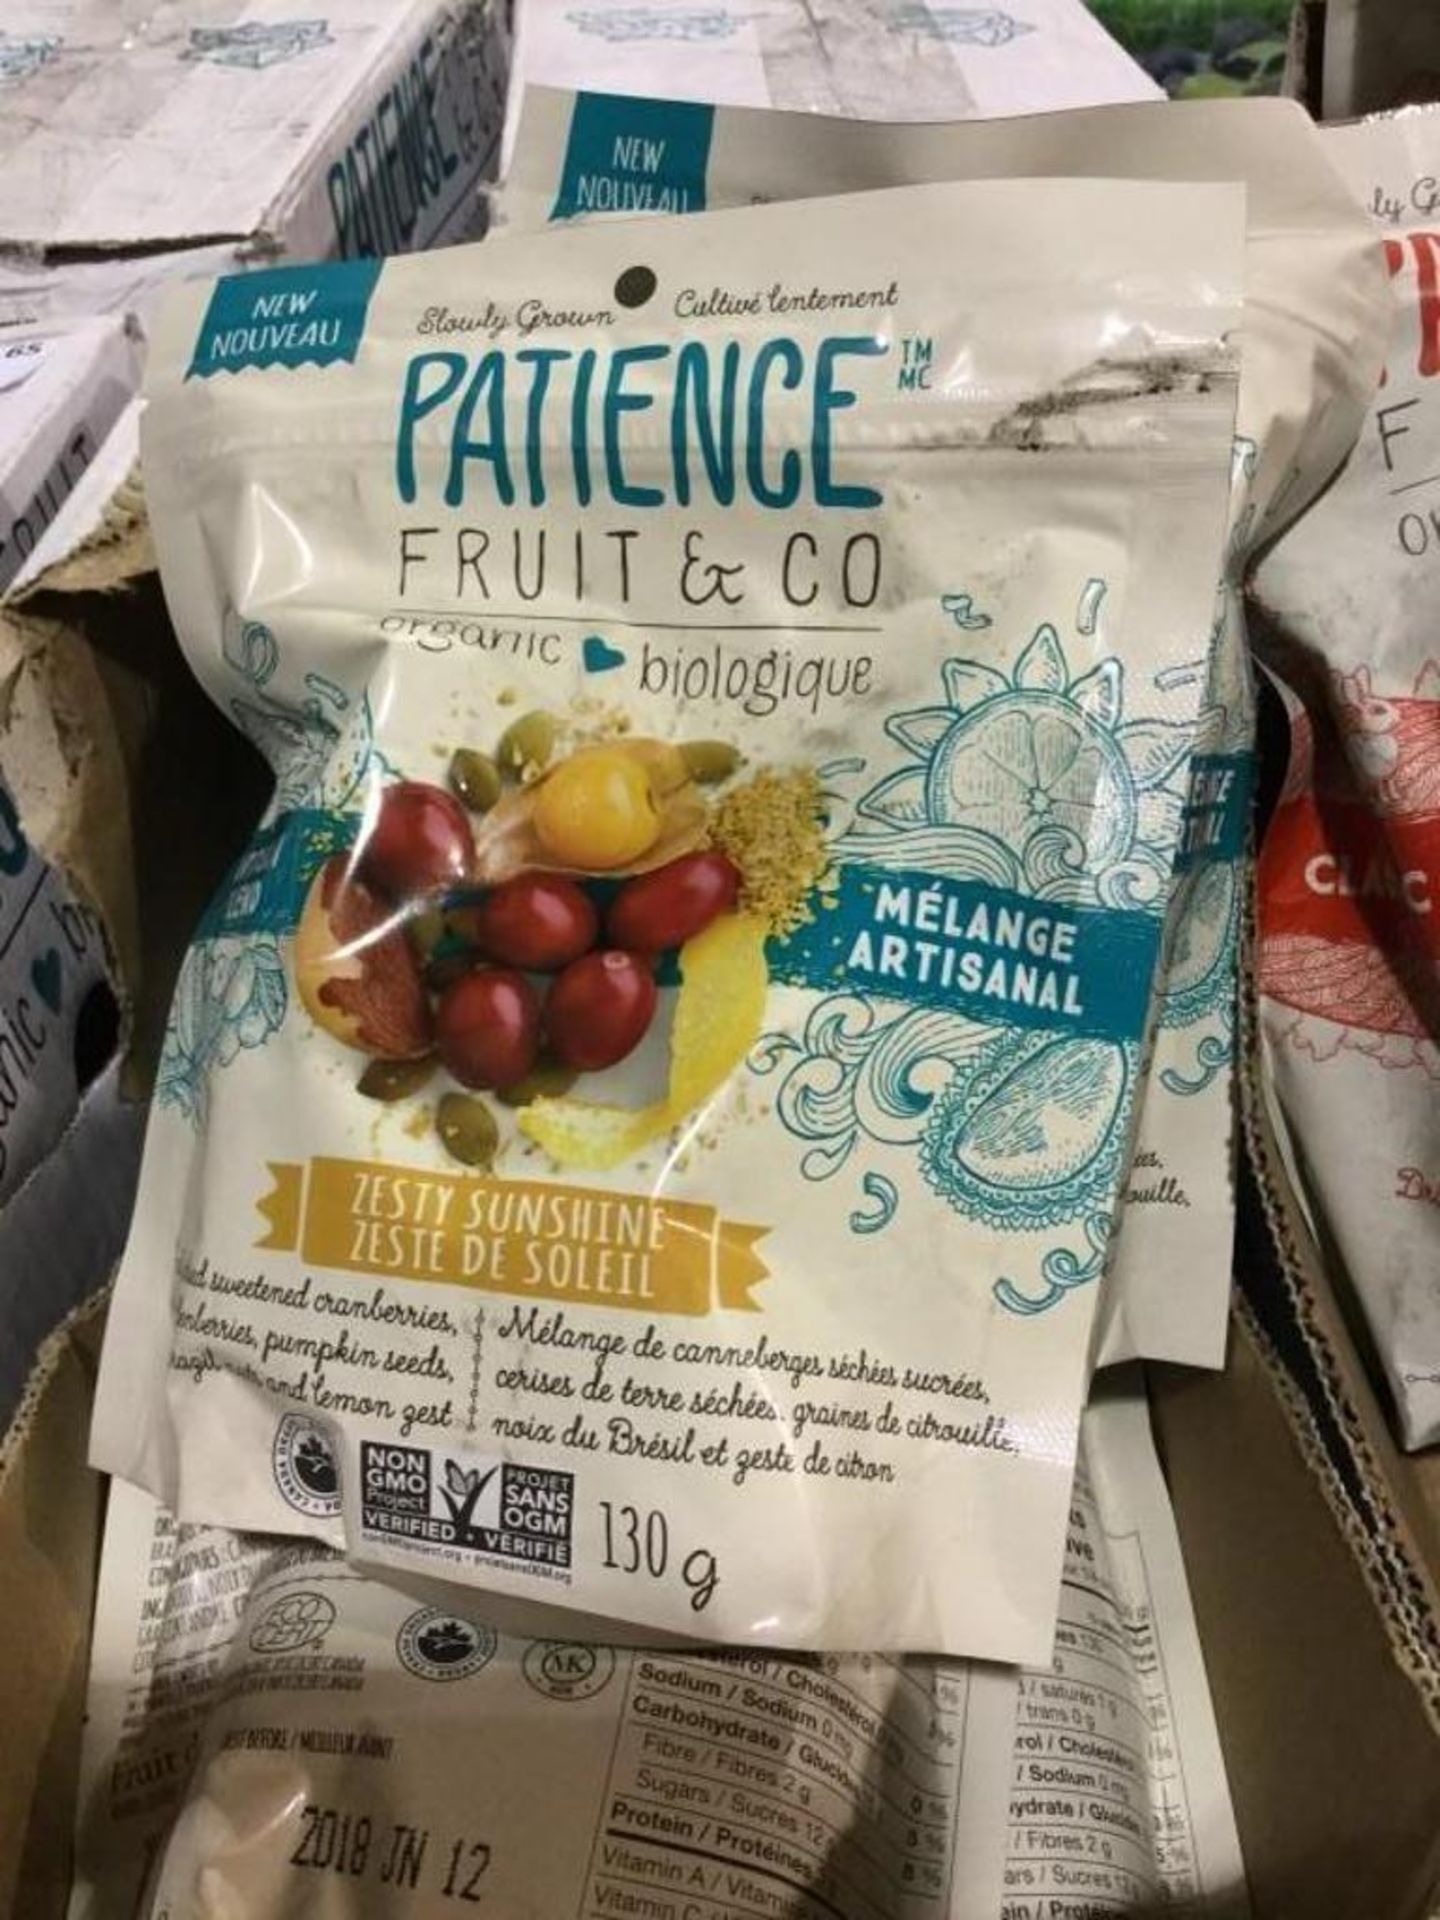 Patience Fruit and co - Fruit Snacks - Image 2 of 2